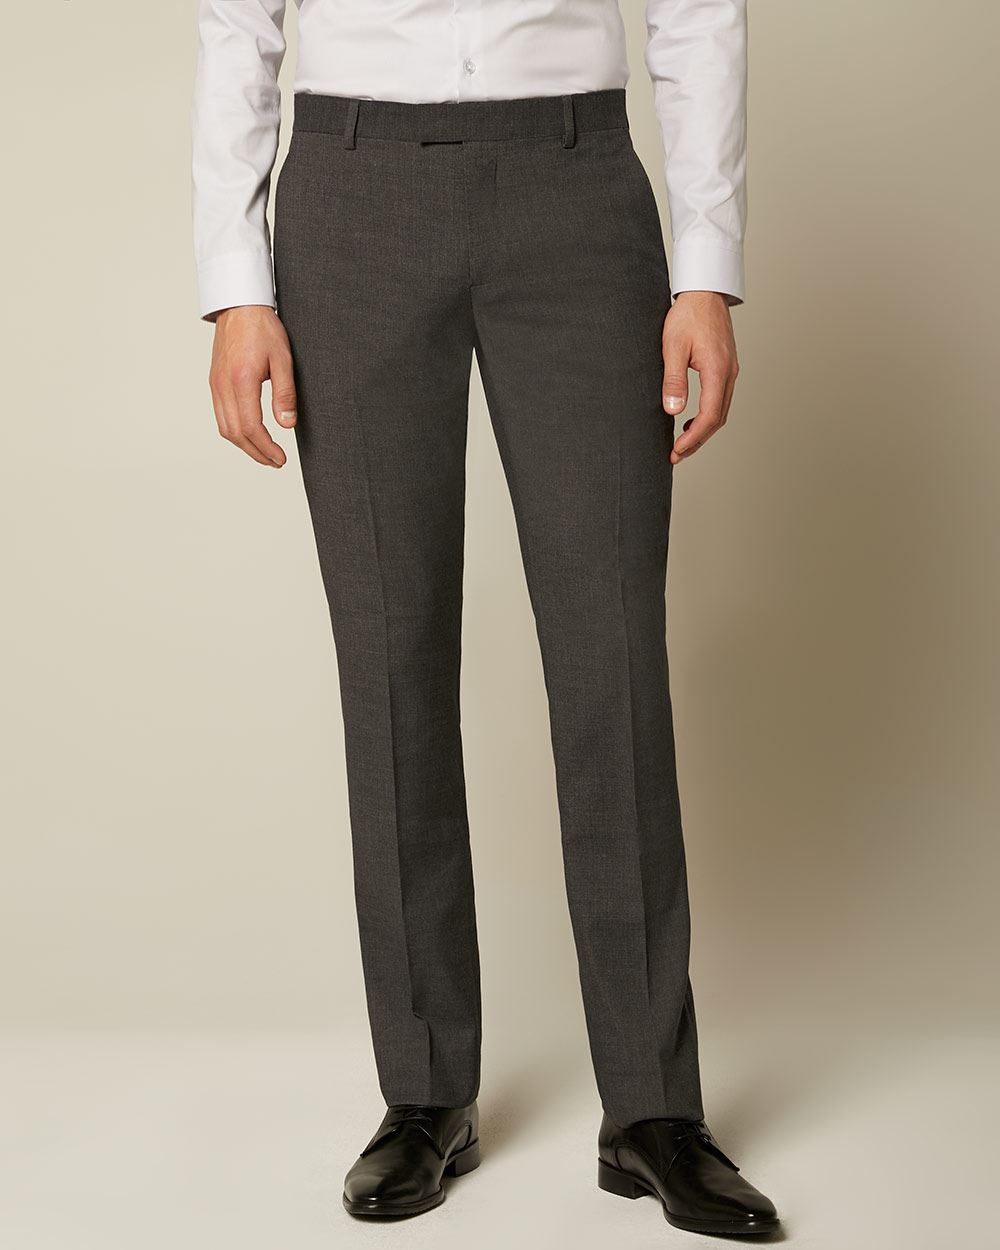 Essential Tailored Fit Dark Grey suit Pant - 30'' | RW&CO.